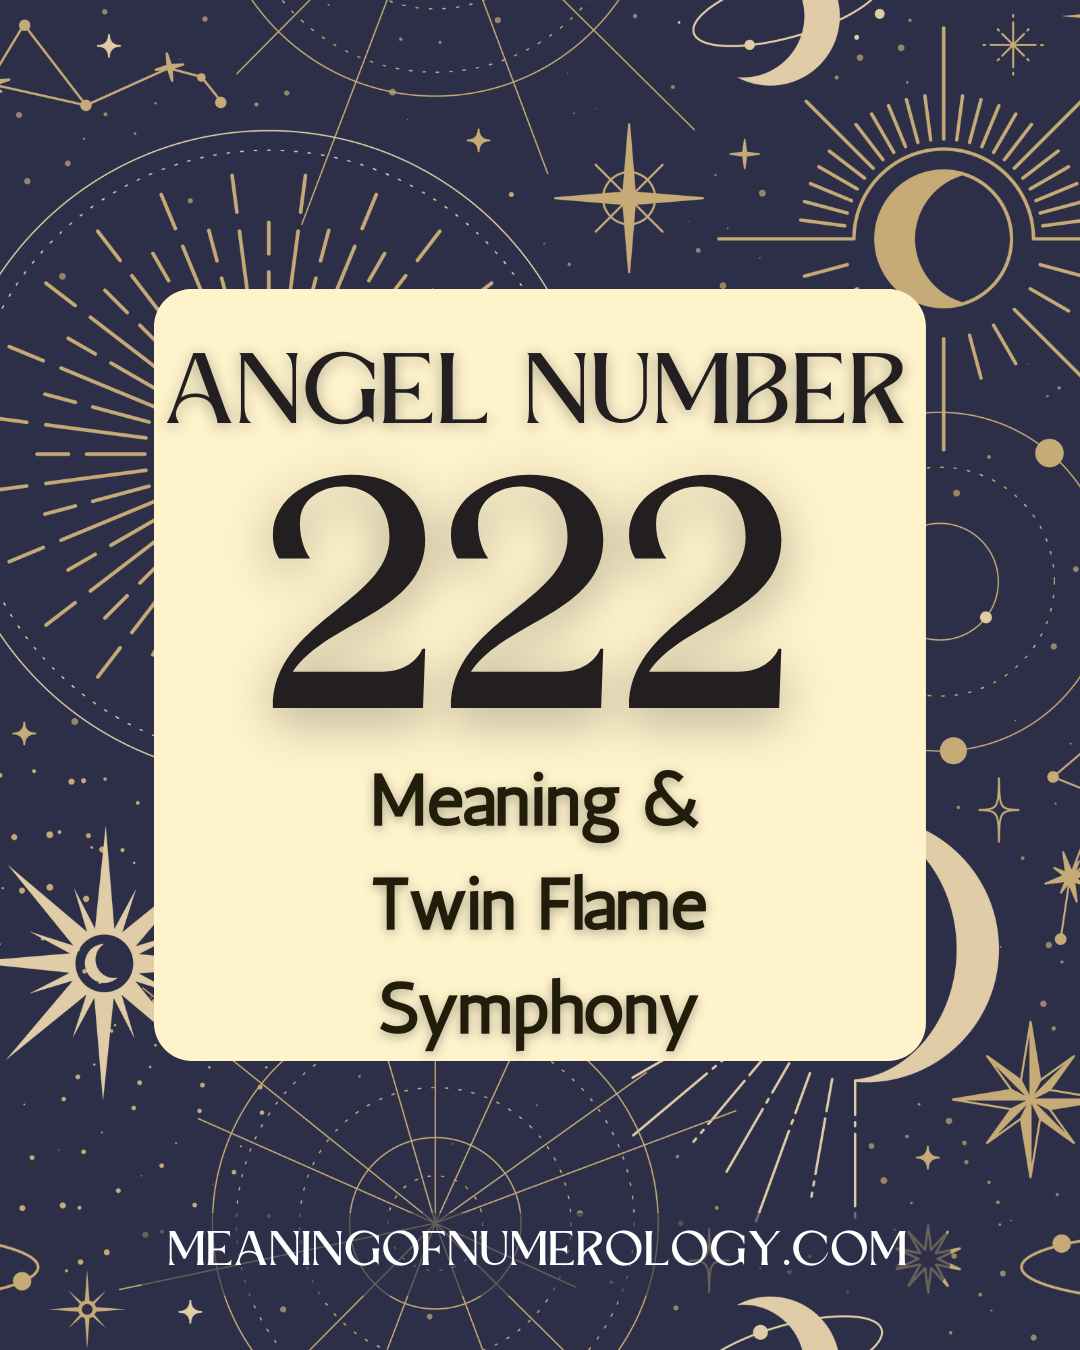 Purple Mystic Astrology Moon Angel Number 222 Meaning & Twin Flame Symphony